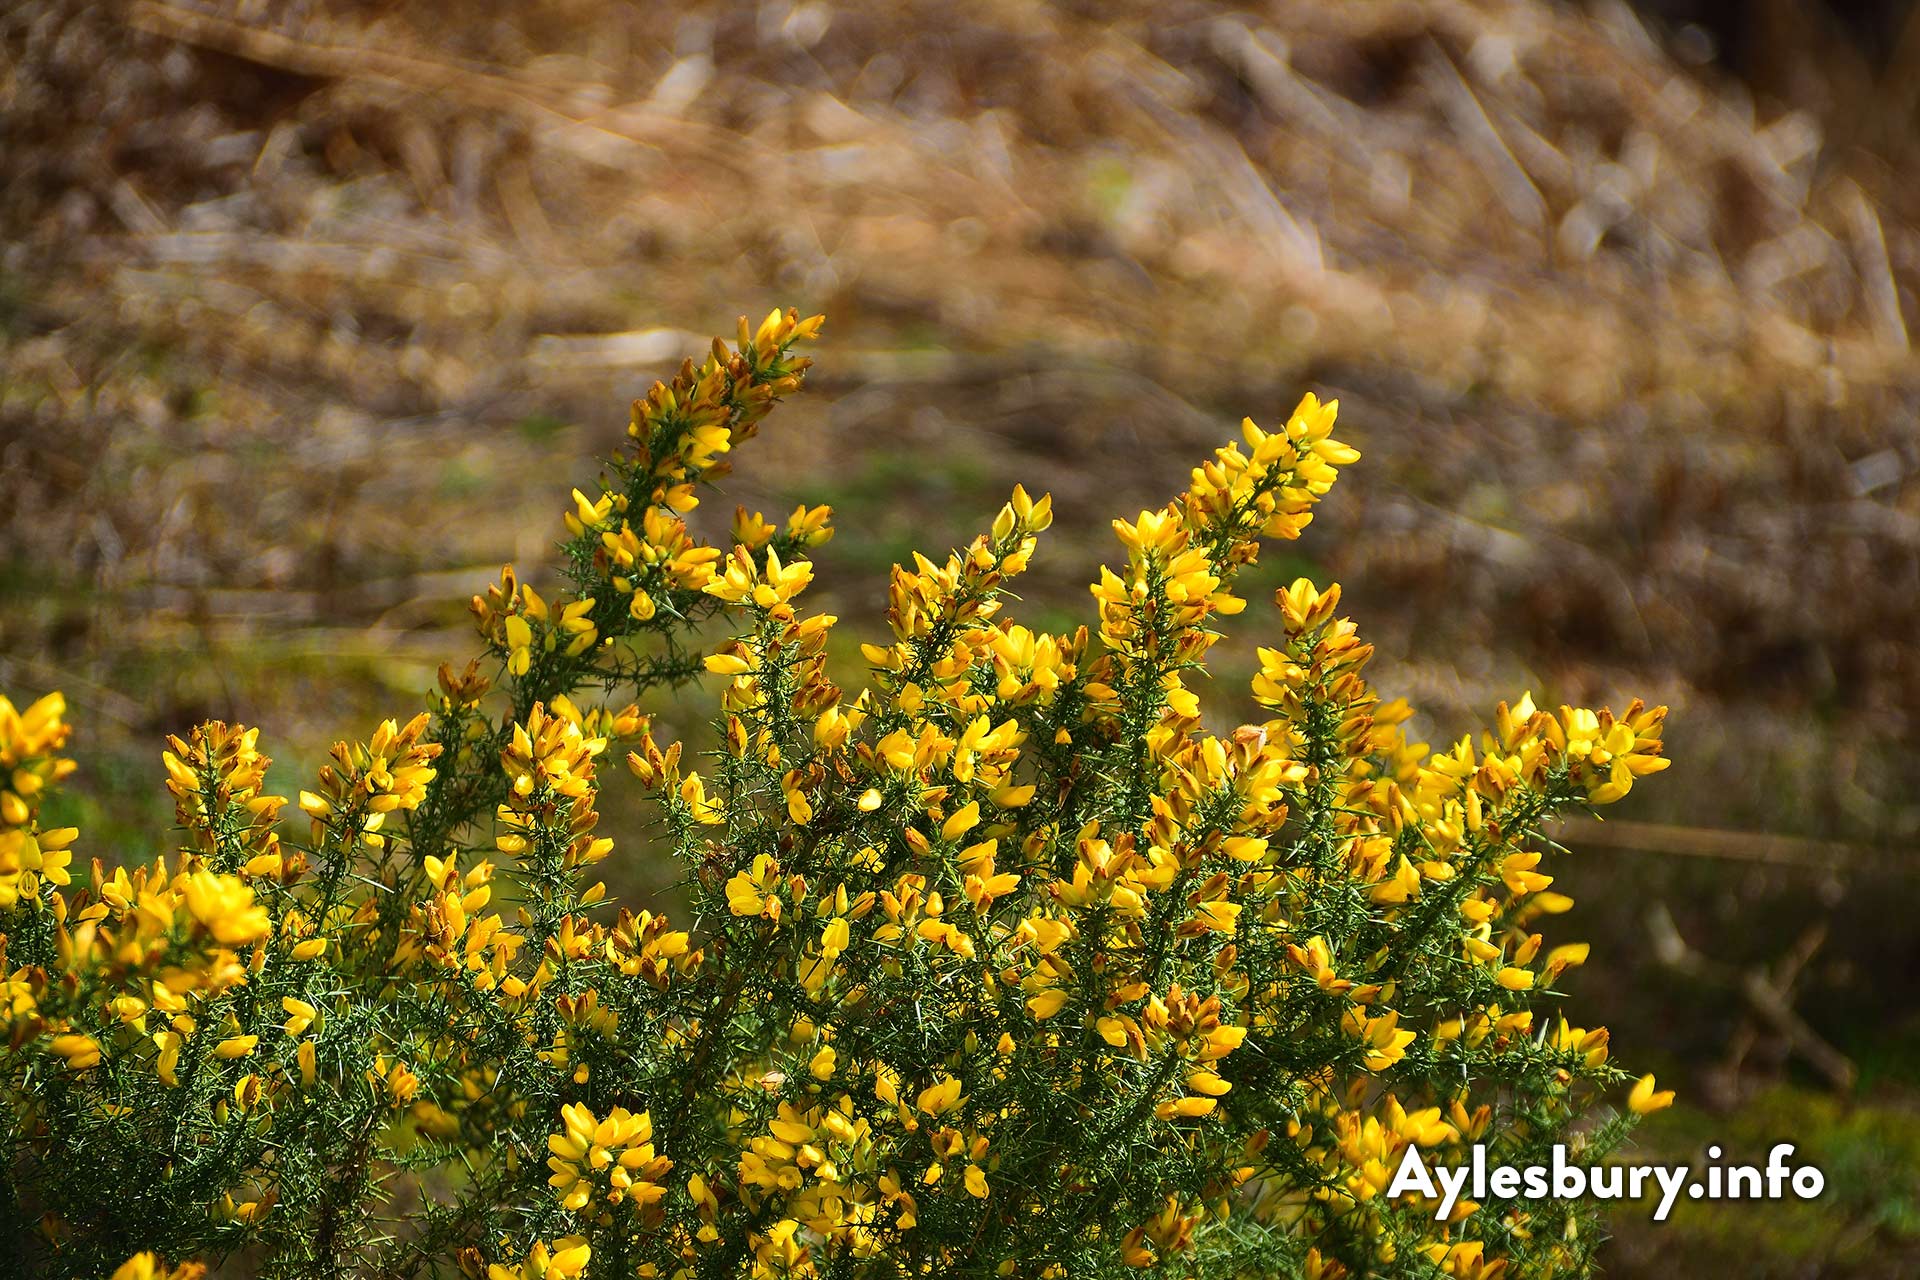 Gorse flowers at Rushmere